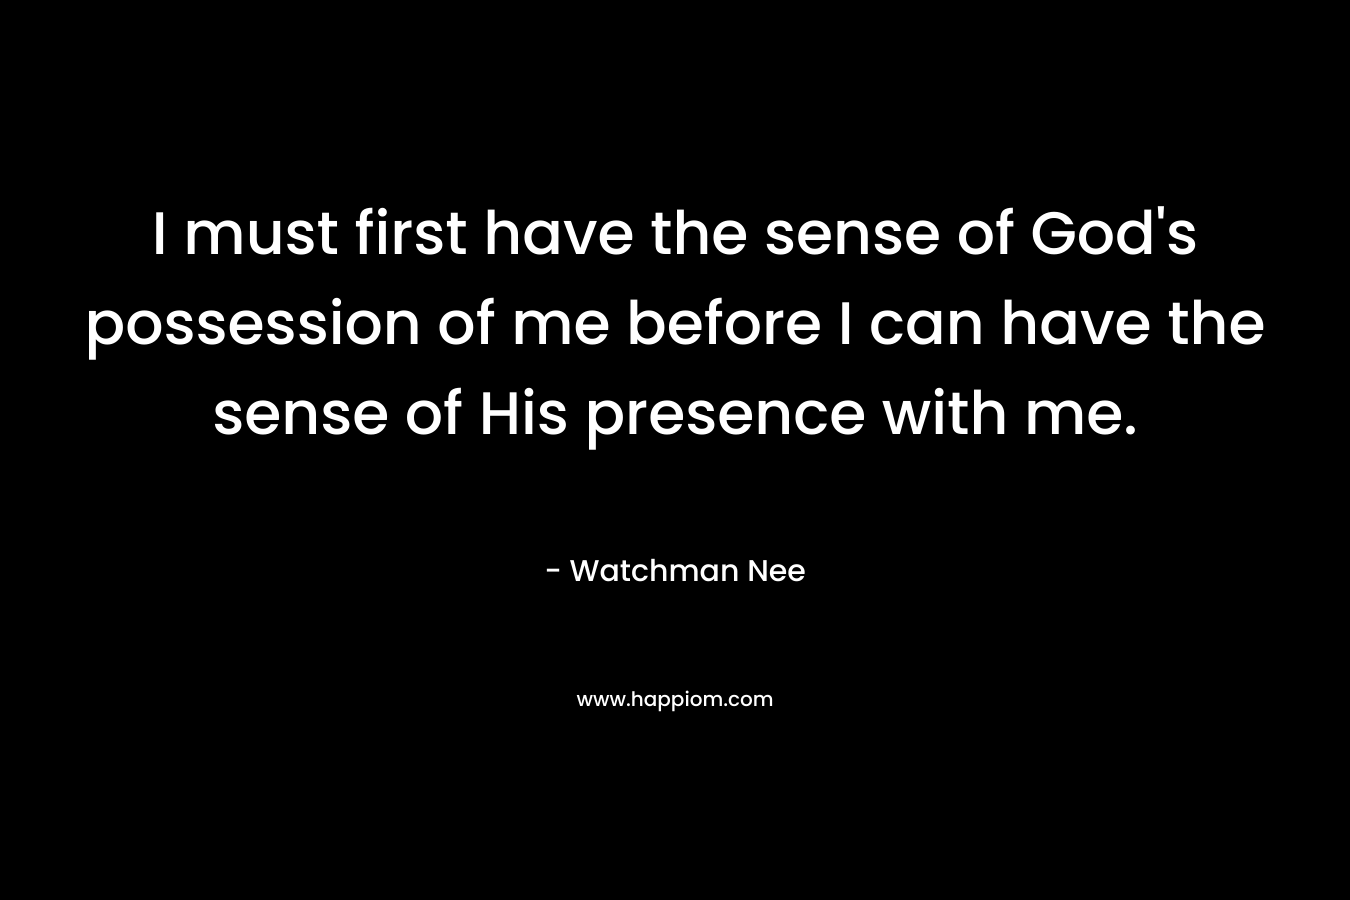 I must first have the sense of God’s possession of me before I can have the sense of His presence with me. – Watchman Nee